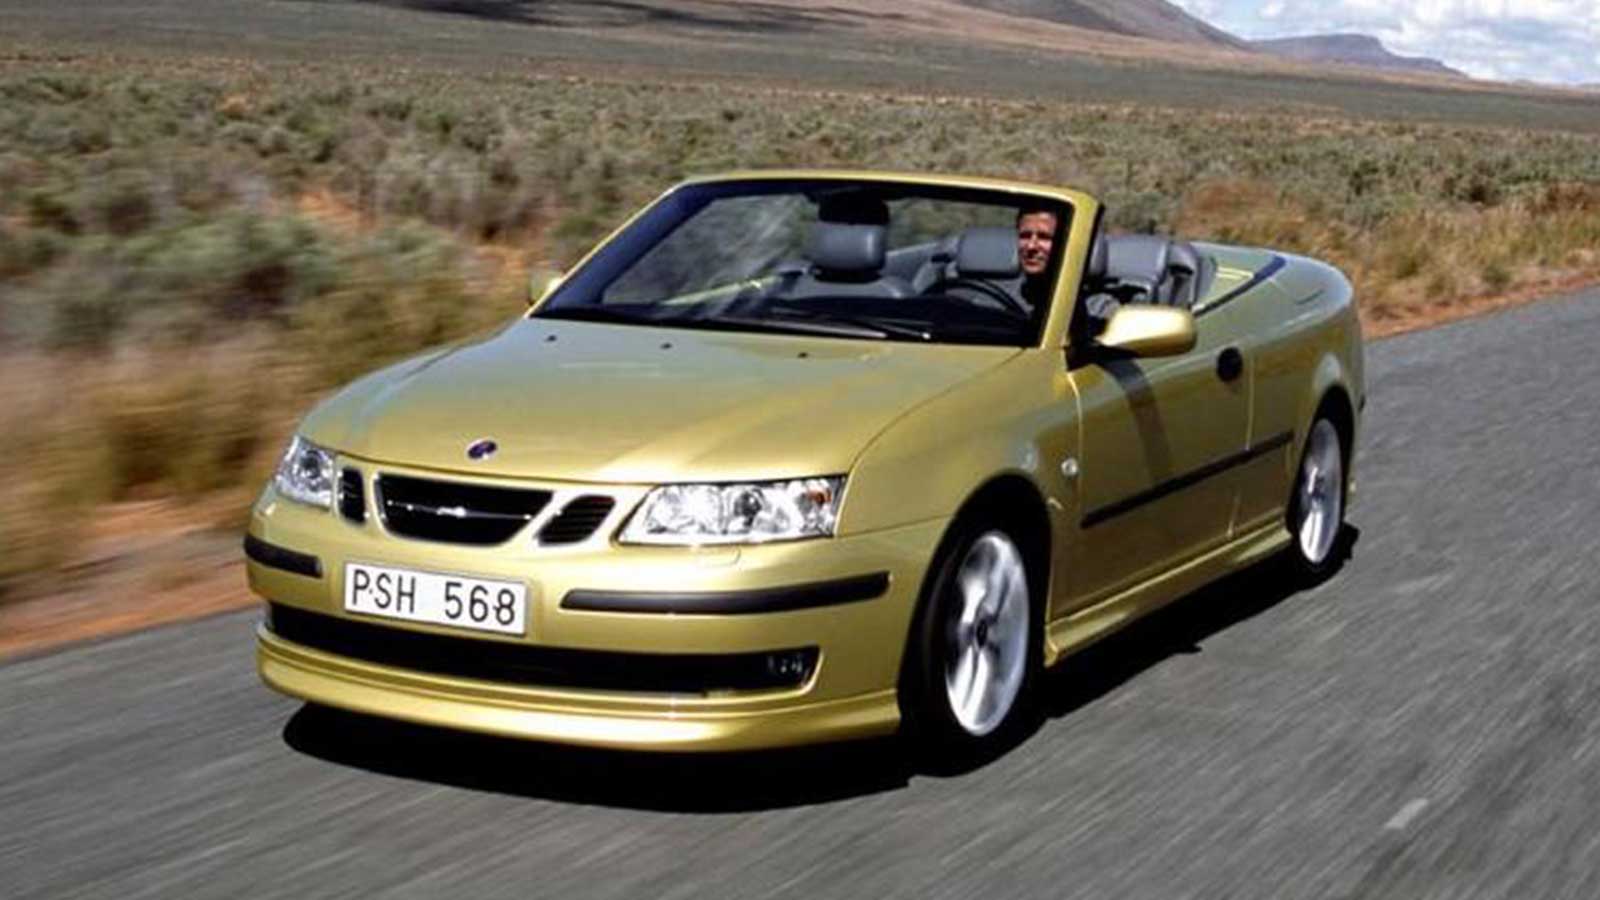 Saab 9-3 Convertible Aero 2005 | Specs and information | DNA Collectibles